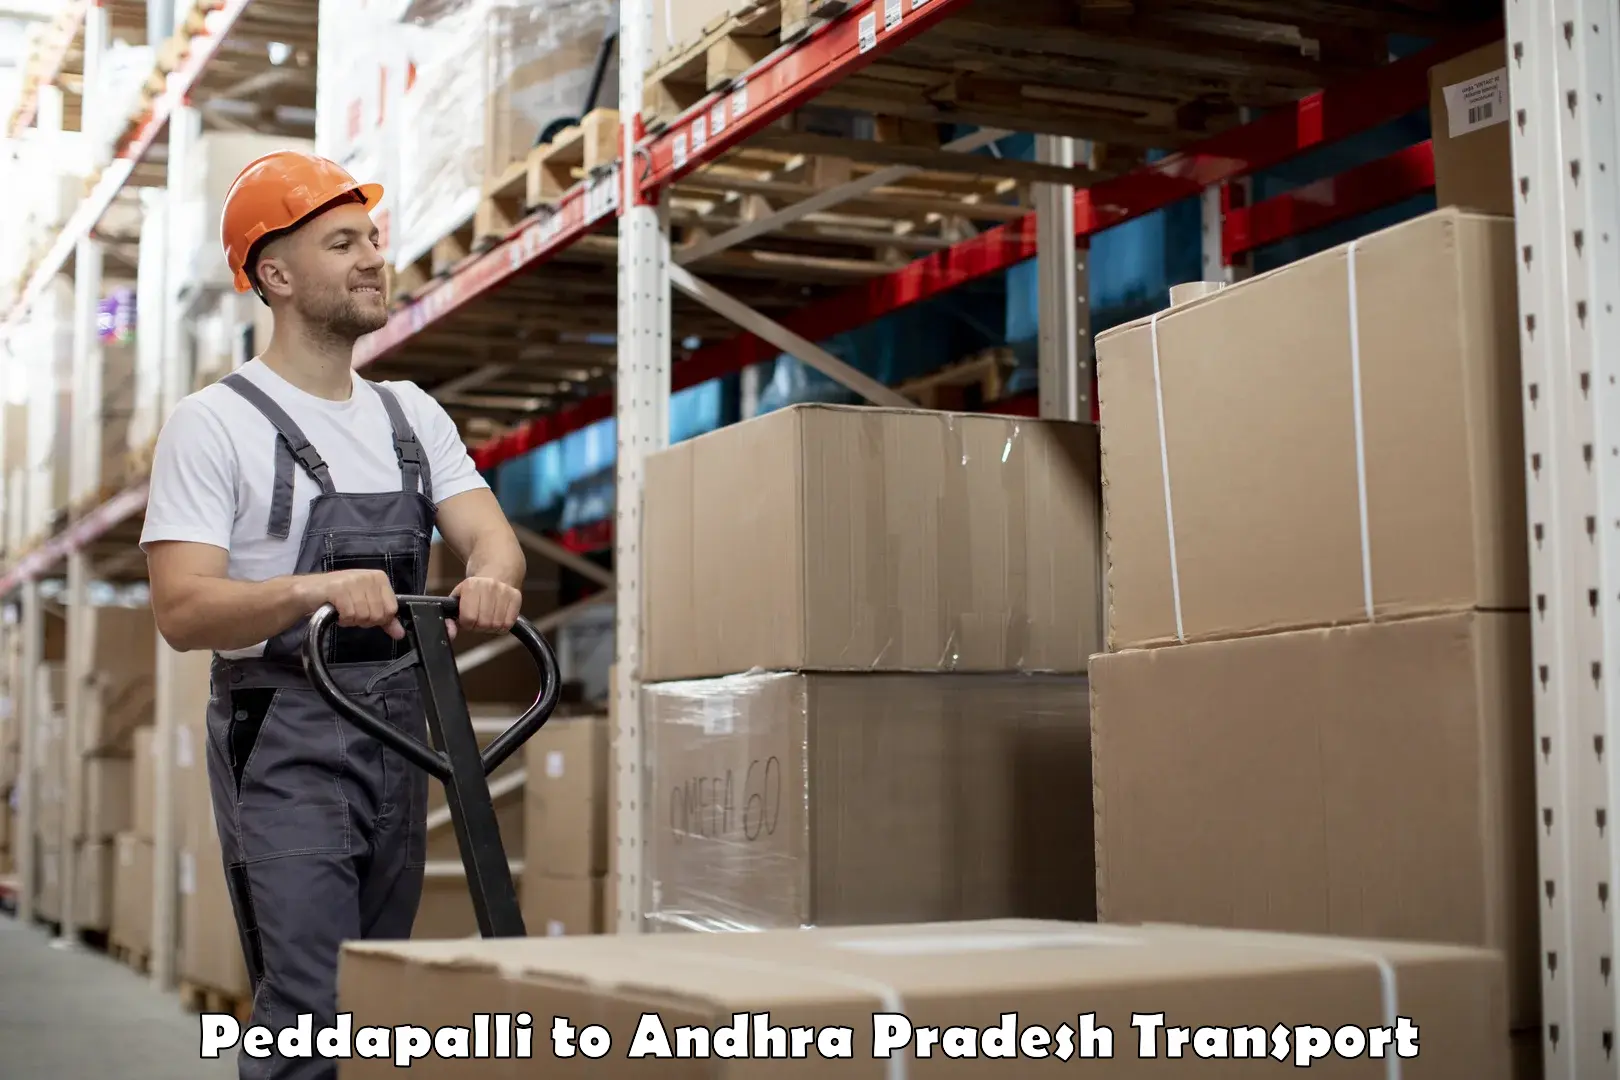 Goods delivery service Peddapalli to Buckinghampet